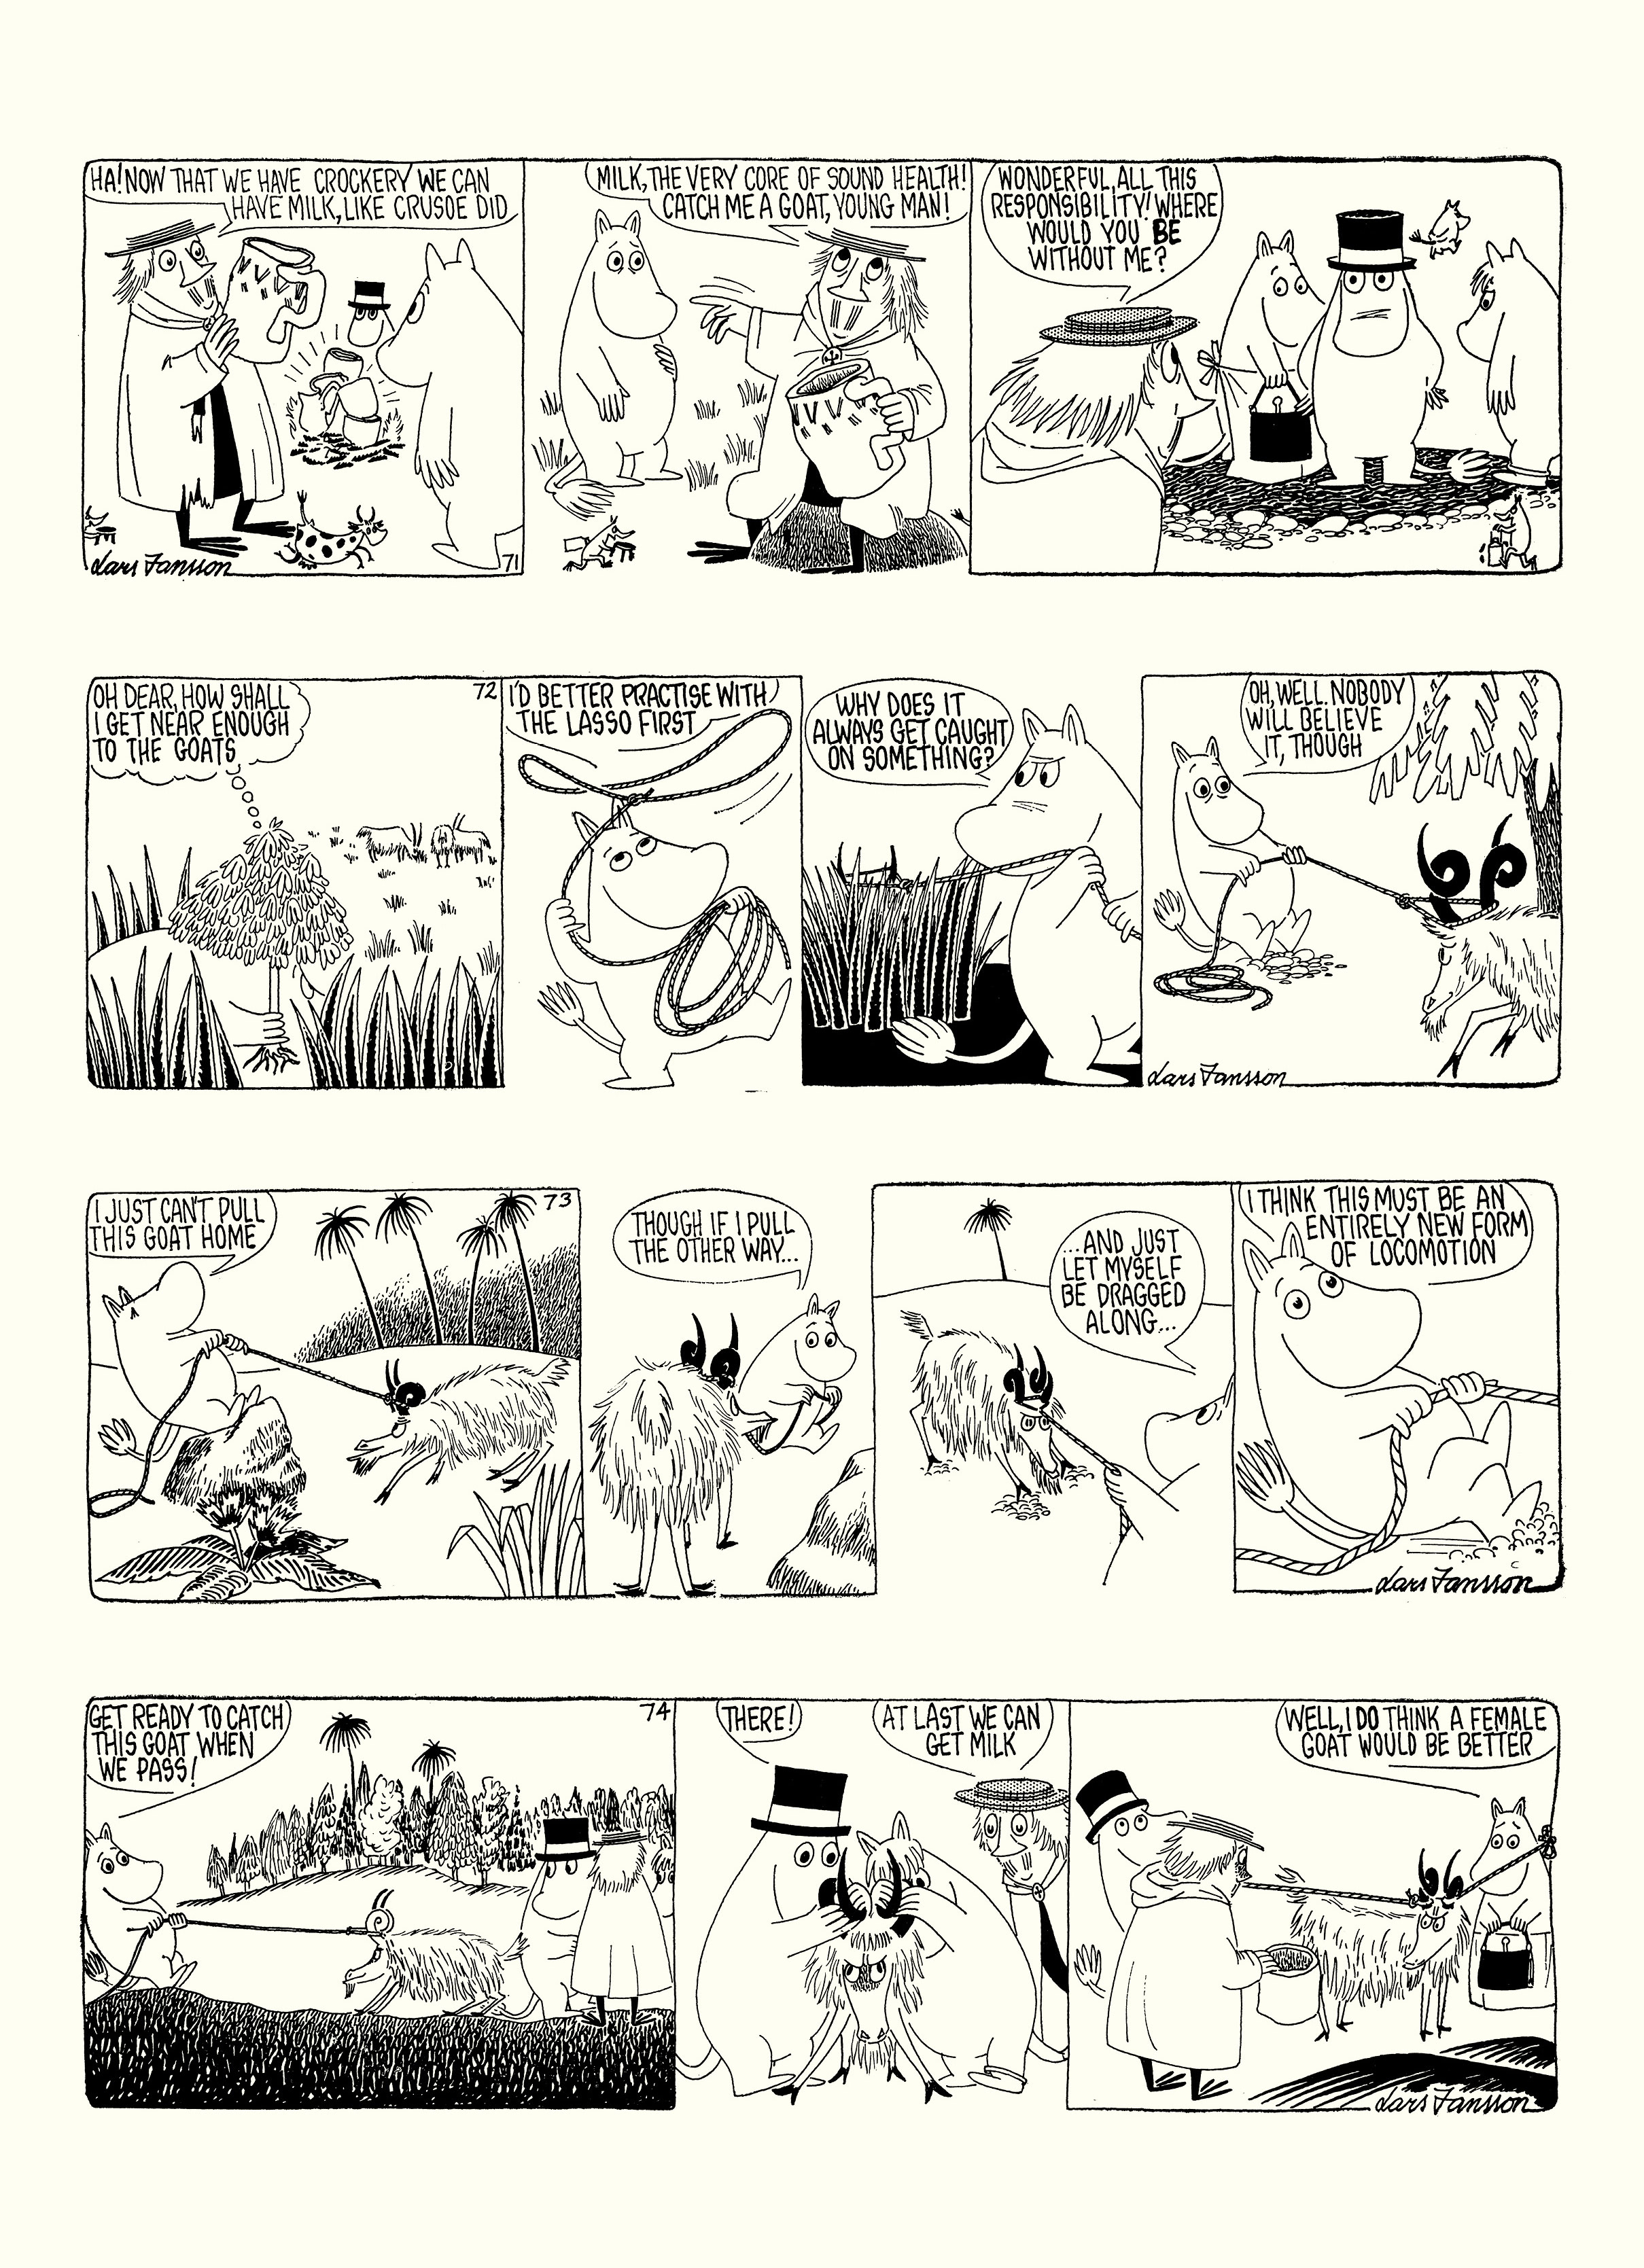 Read online Moomin: The Complete Lars Jansson Comic Strip comic -  Issue # TPB 8 - 23